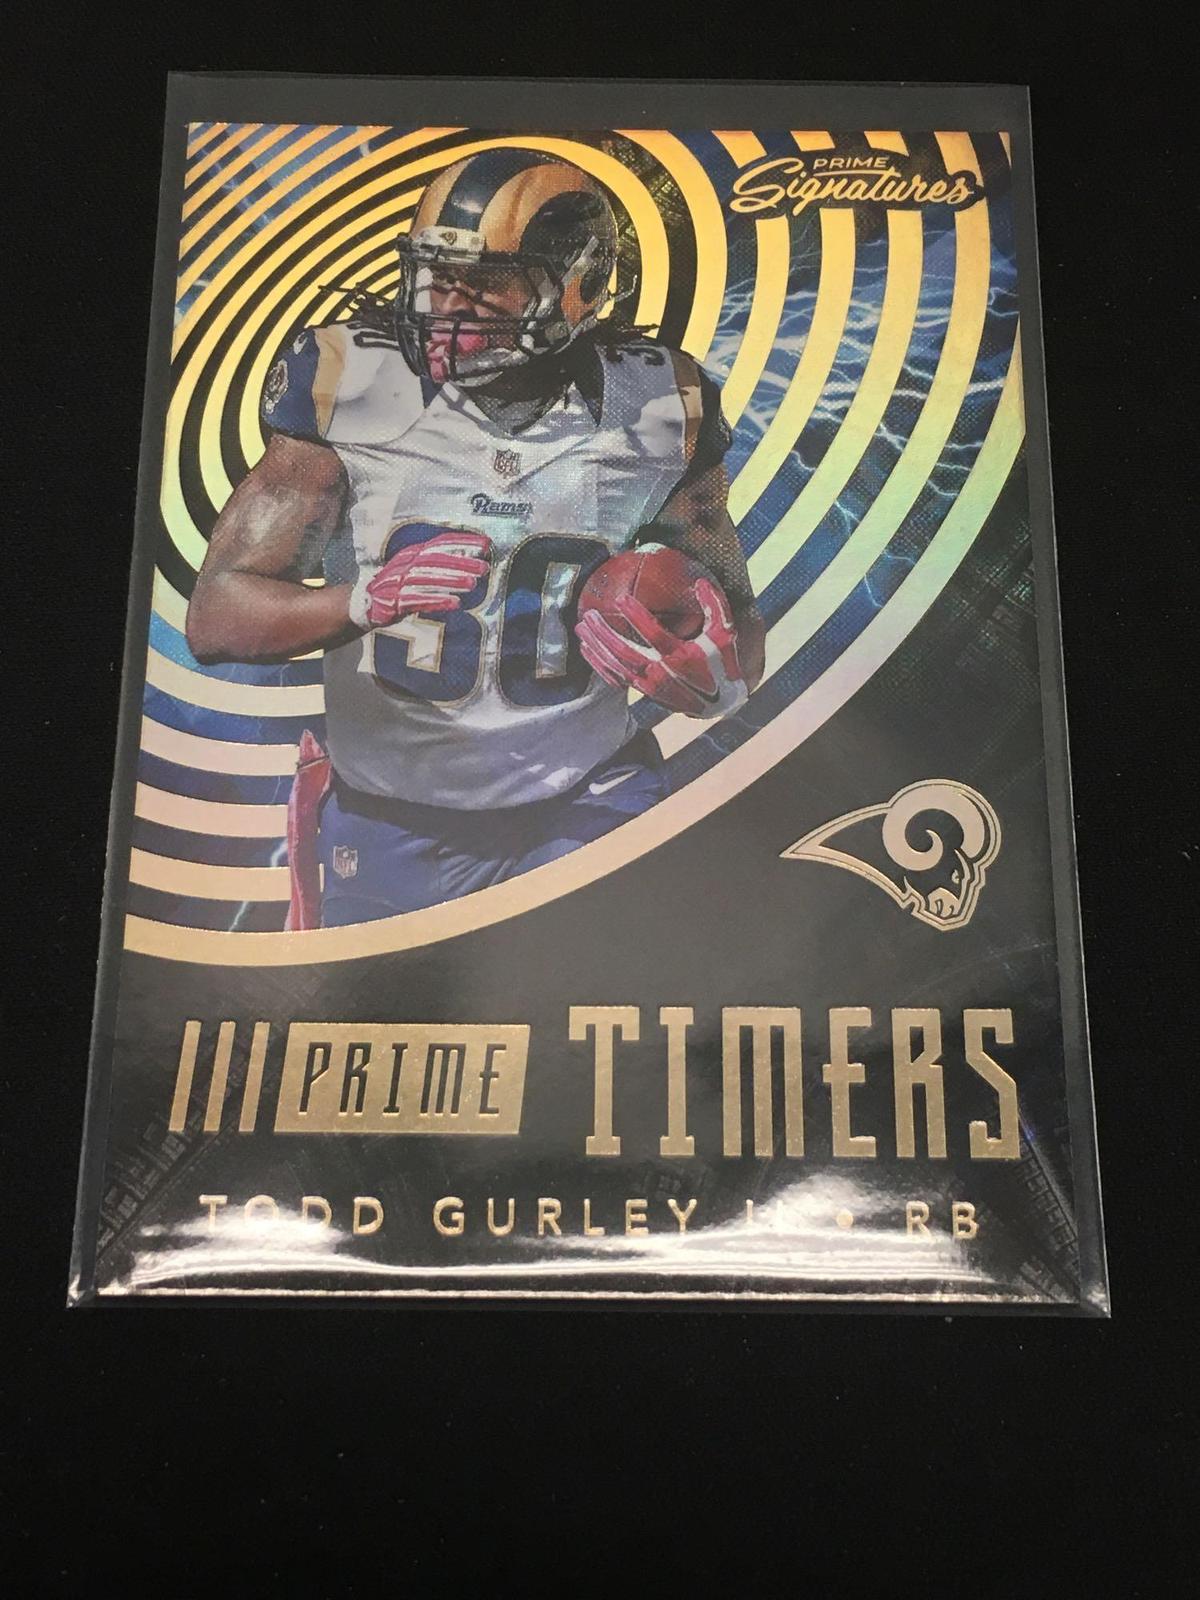 2016 Panini Prime Signatures Prime Timers Todd Gurley II Rams Insert Football Card